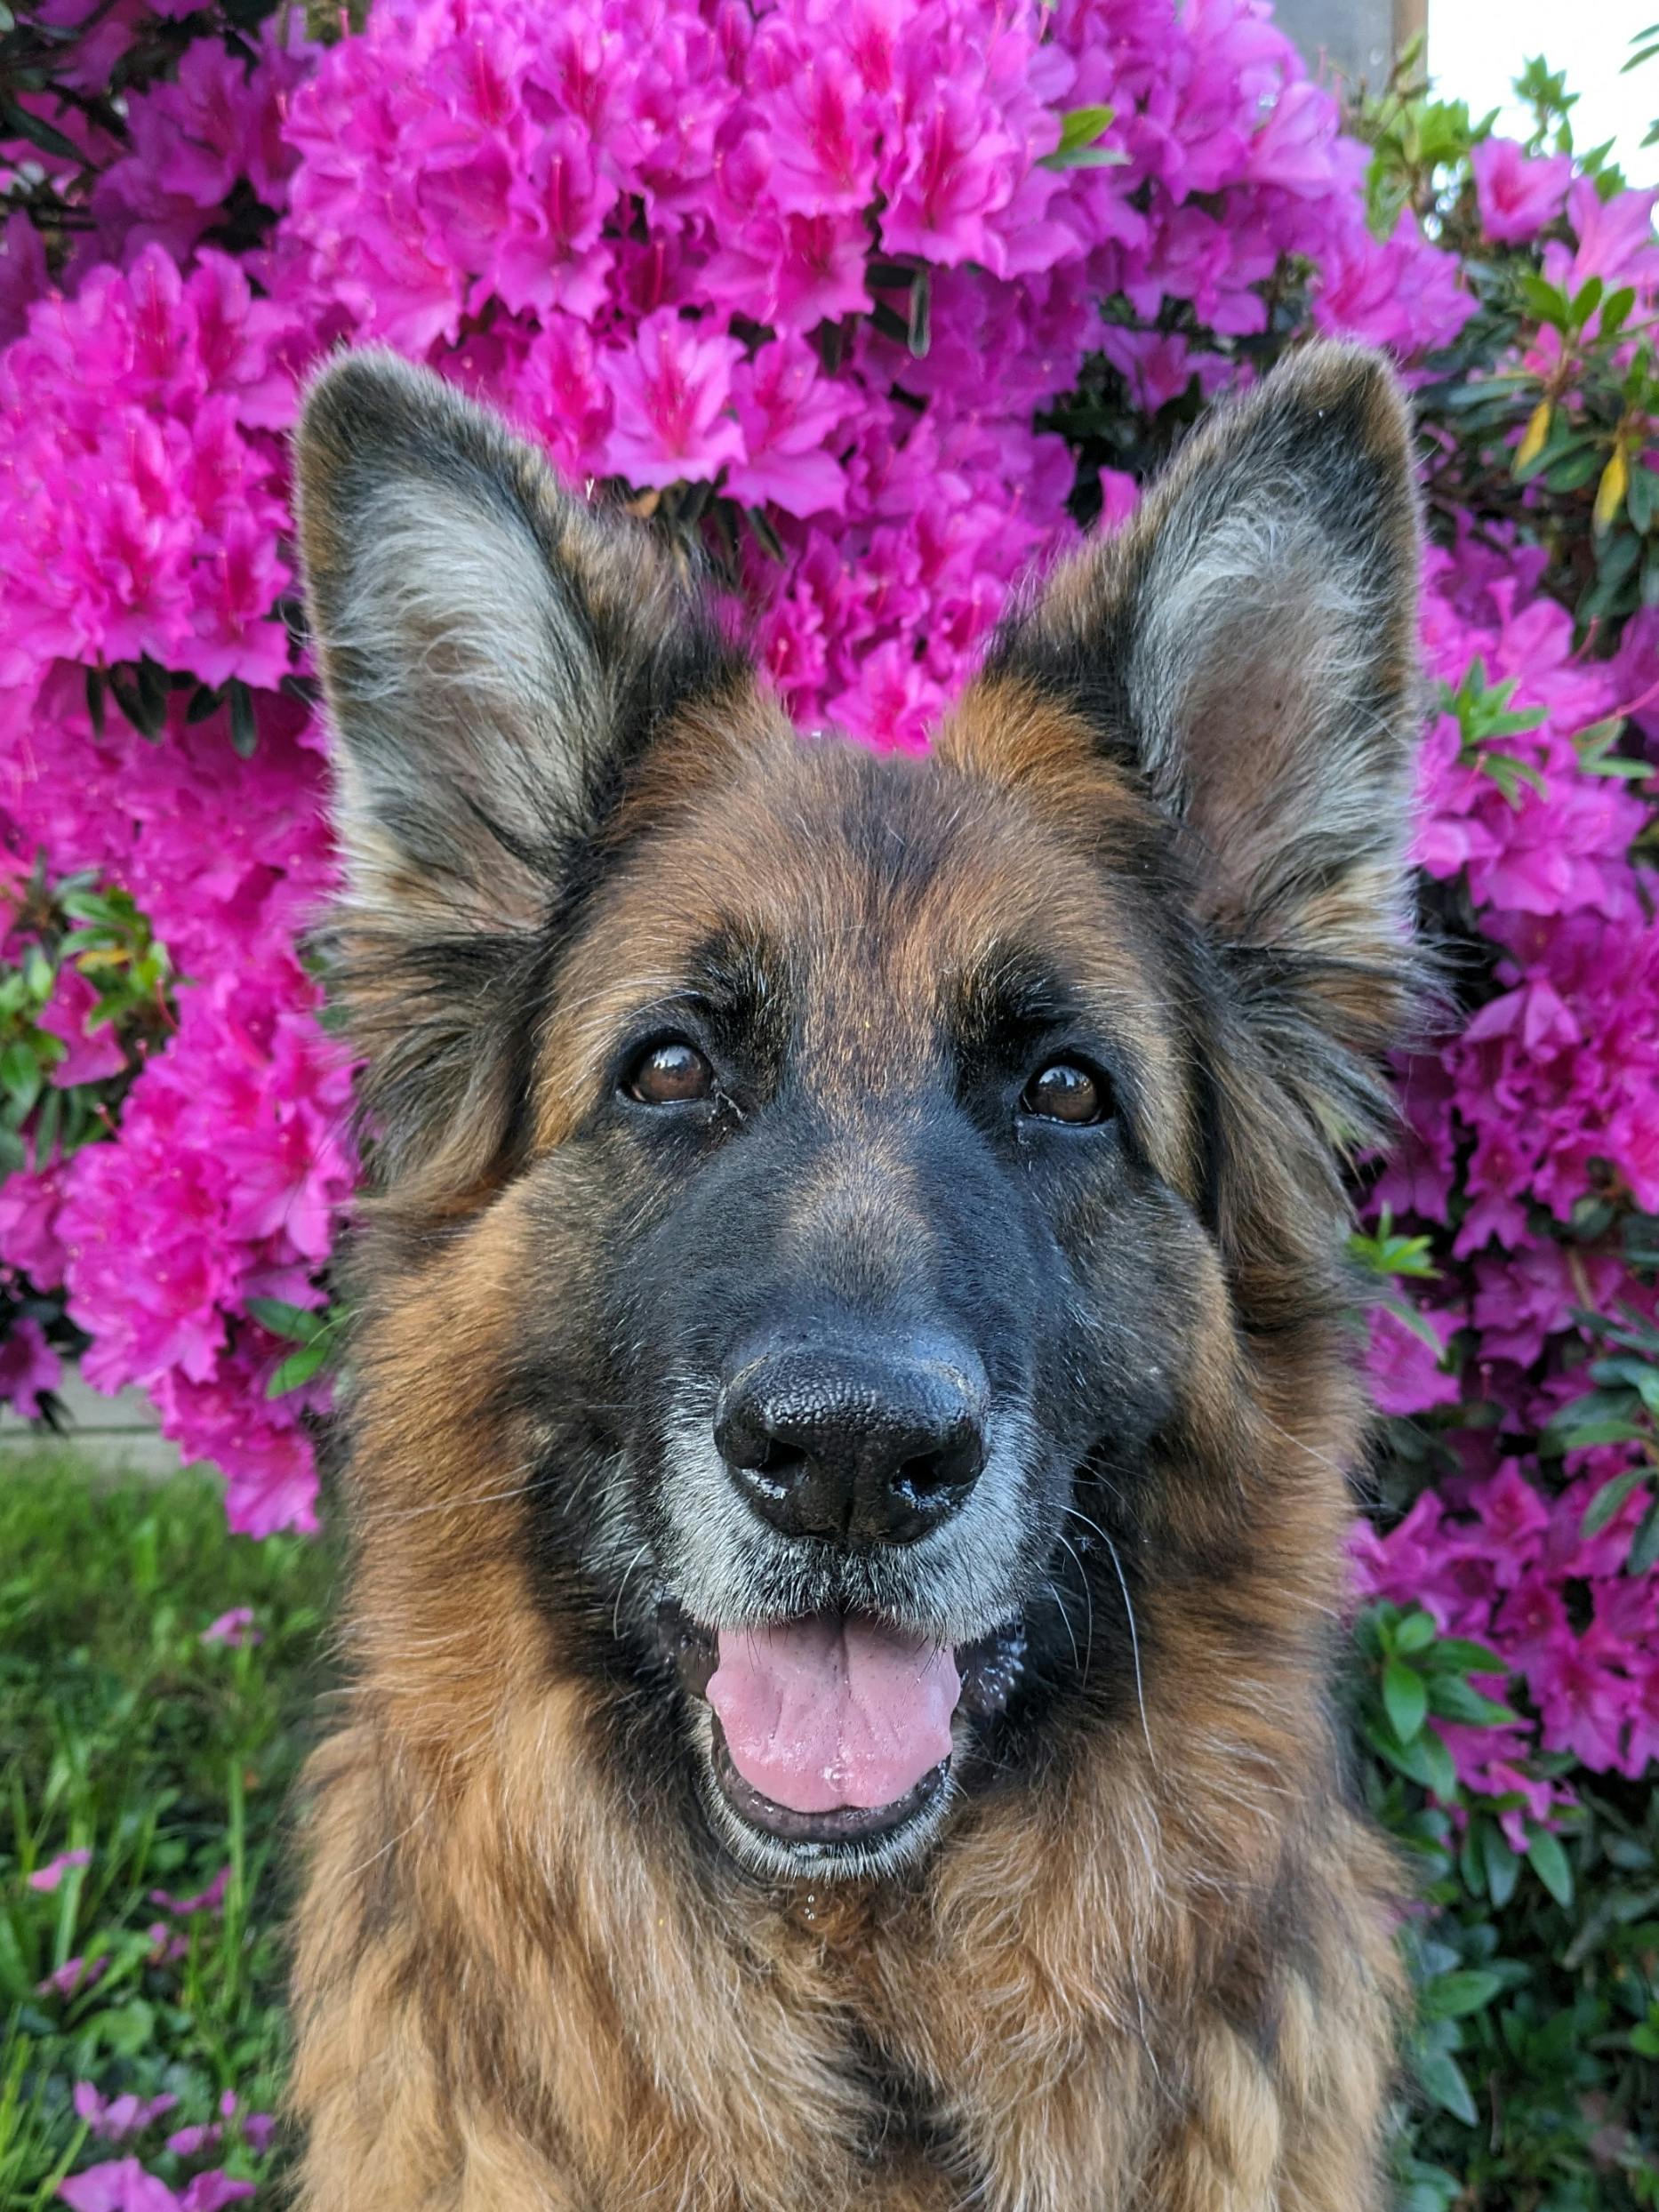 A grey-muzzled German Shepherd Dog in front of a bloom of pink flowers